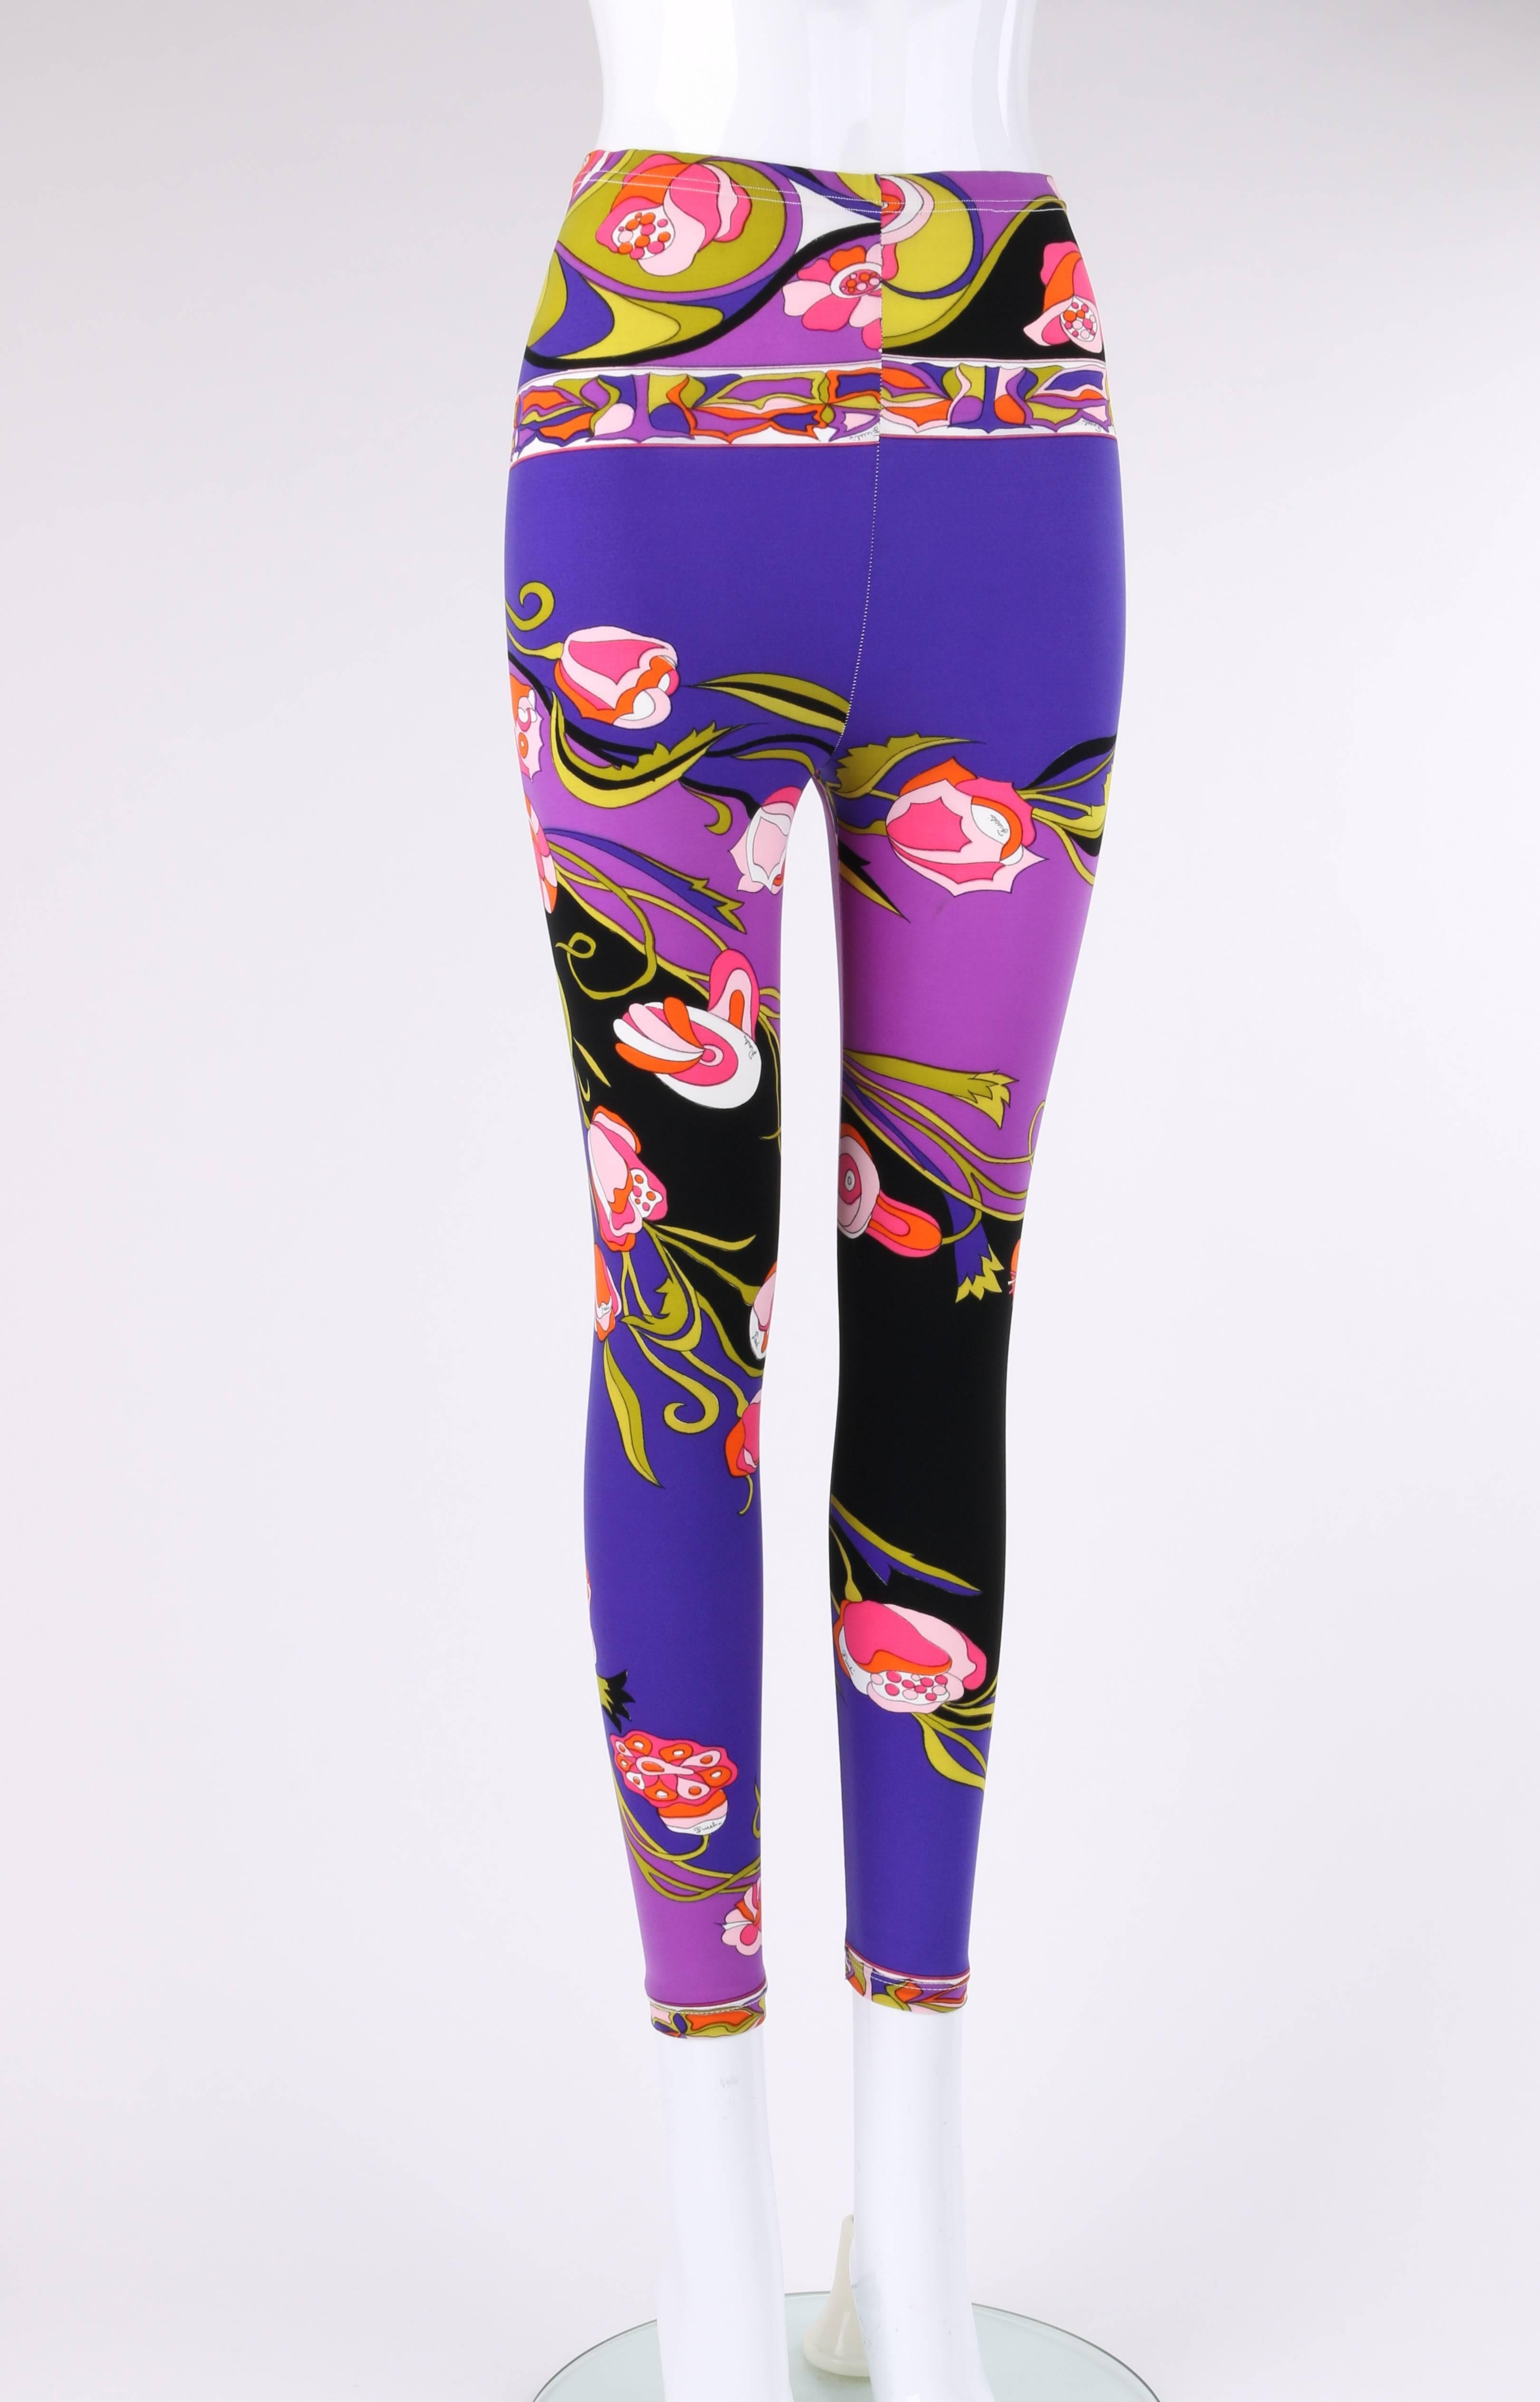 Vintage Emilio Pucci c.1970's purple multicolor floral signature print knit cropped leggings. Multicolor large floral signature print in shades of purple, blue, black, pink, orange, green, and white. Elastic waistband. High waisted. Cropped ankle